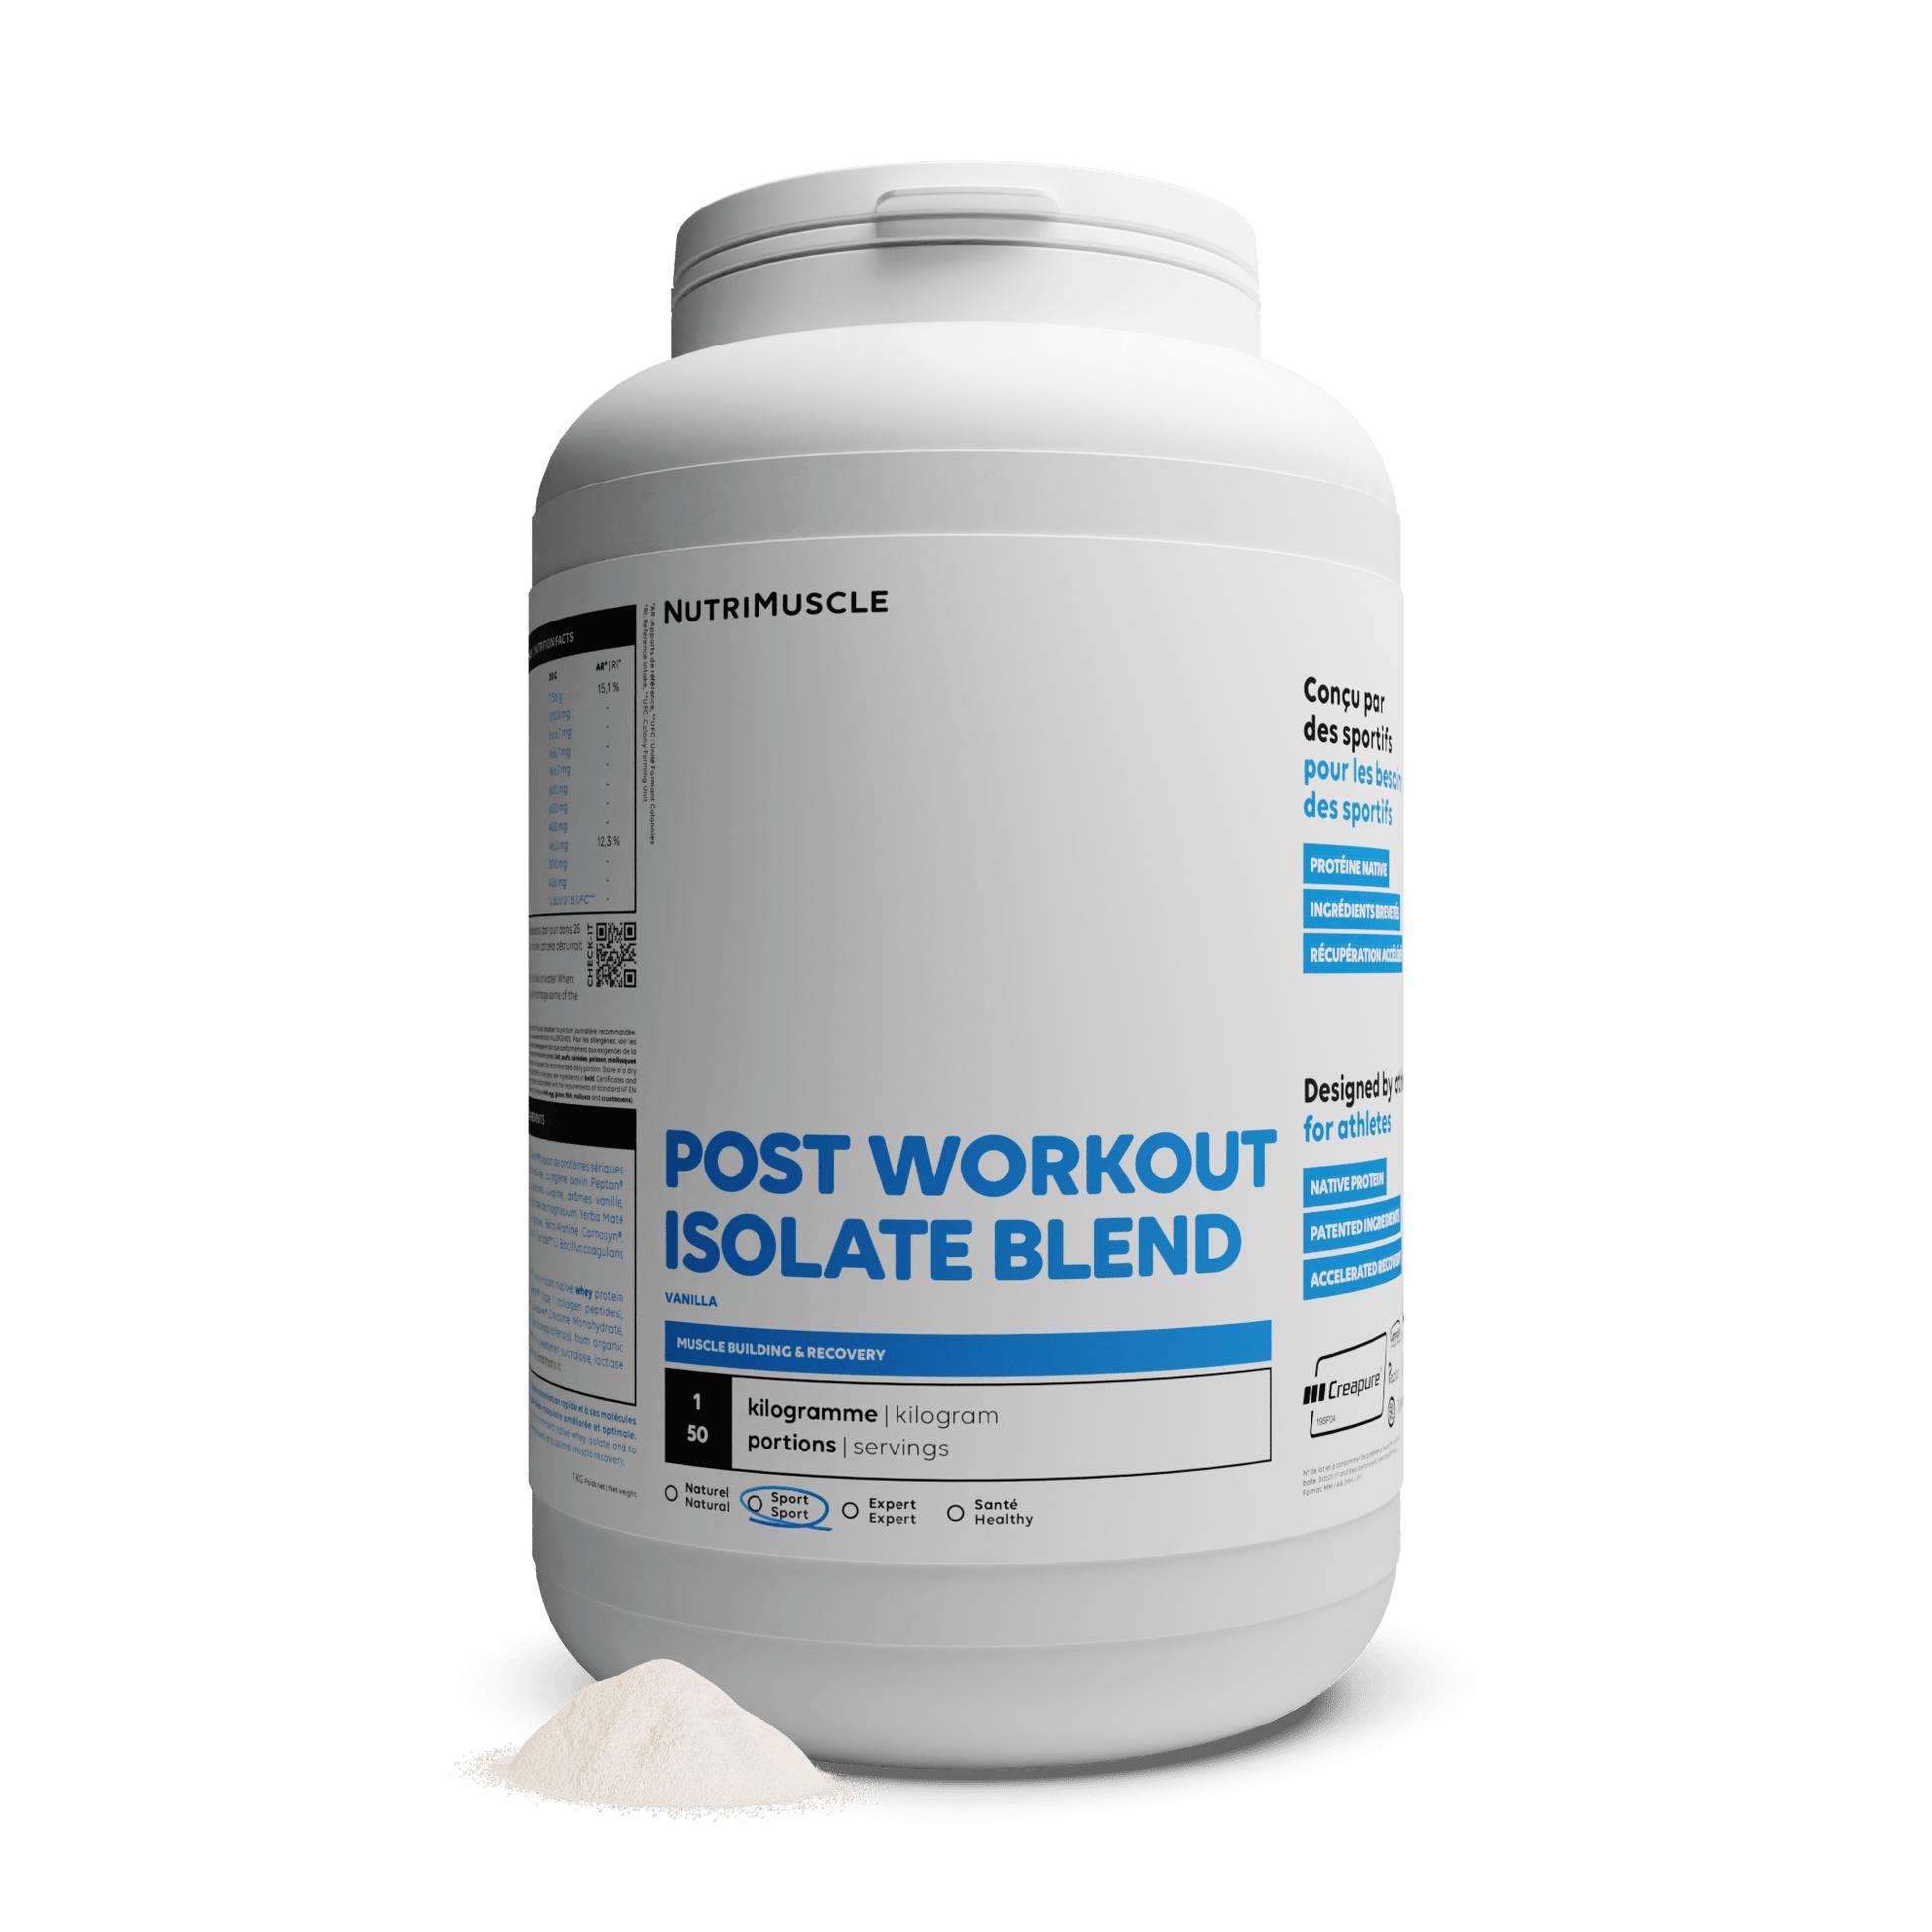 Nutrimuscle Protéines Vanille / 1.00 kg Post Workout Isolate Blend